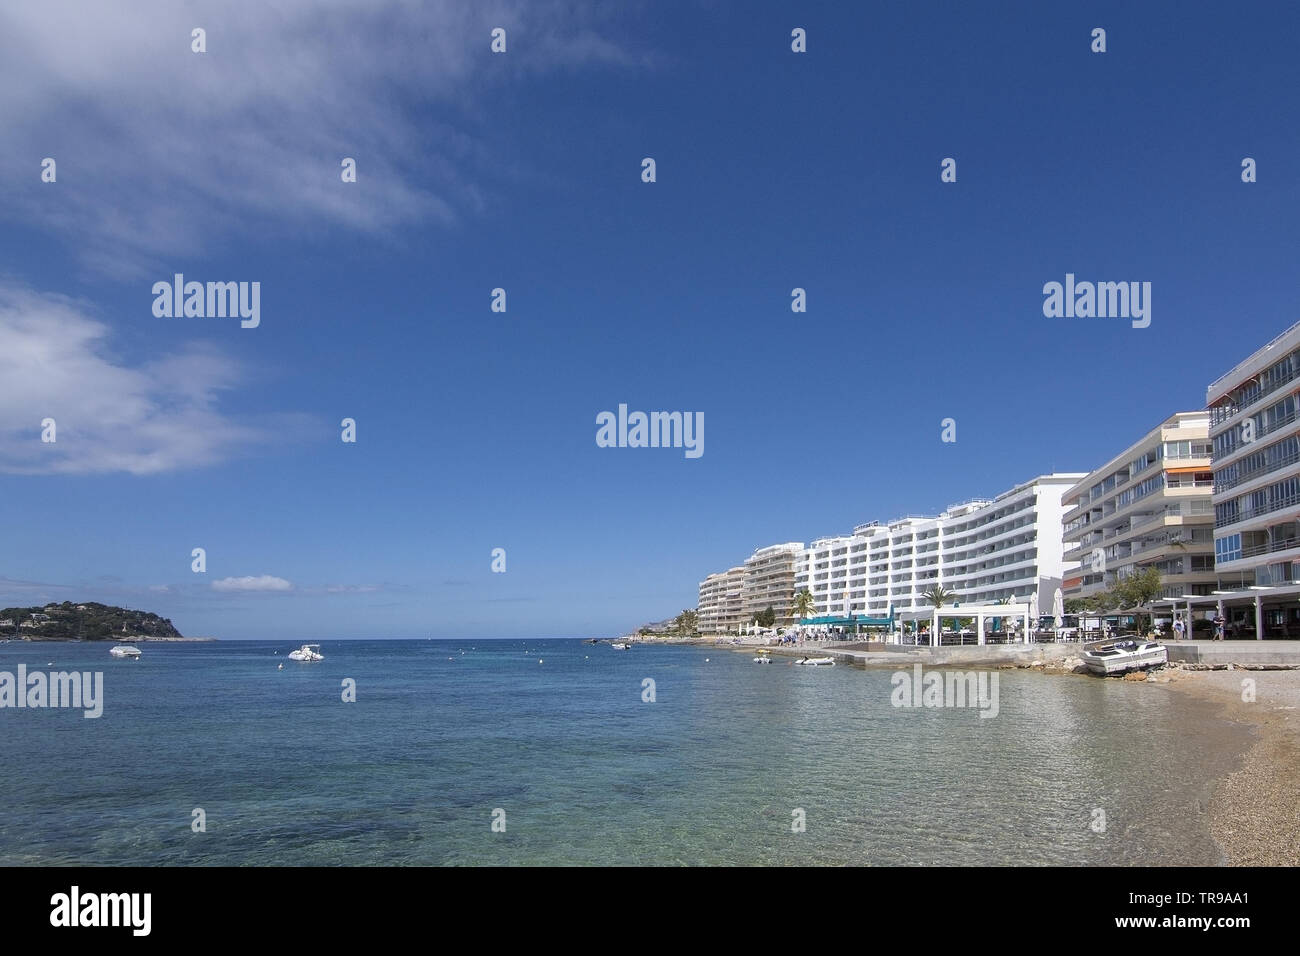 SANTA PONSA, MALLORCA, SPAIN - MAY 29, 2019: Seaside hotels and apartment buildings from the sea on May 29, 2019 in Santa Ponsa, Mallorca, Spain. Stock Photo